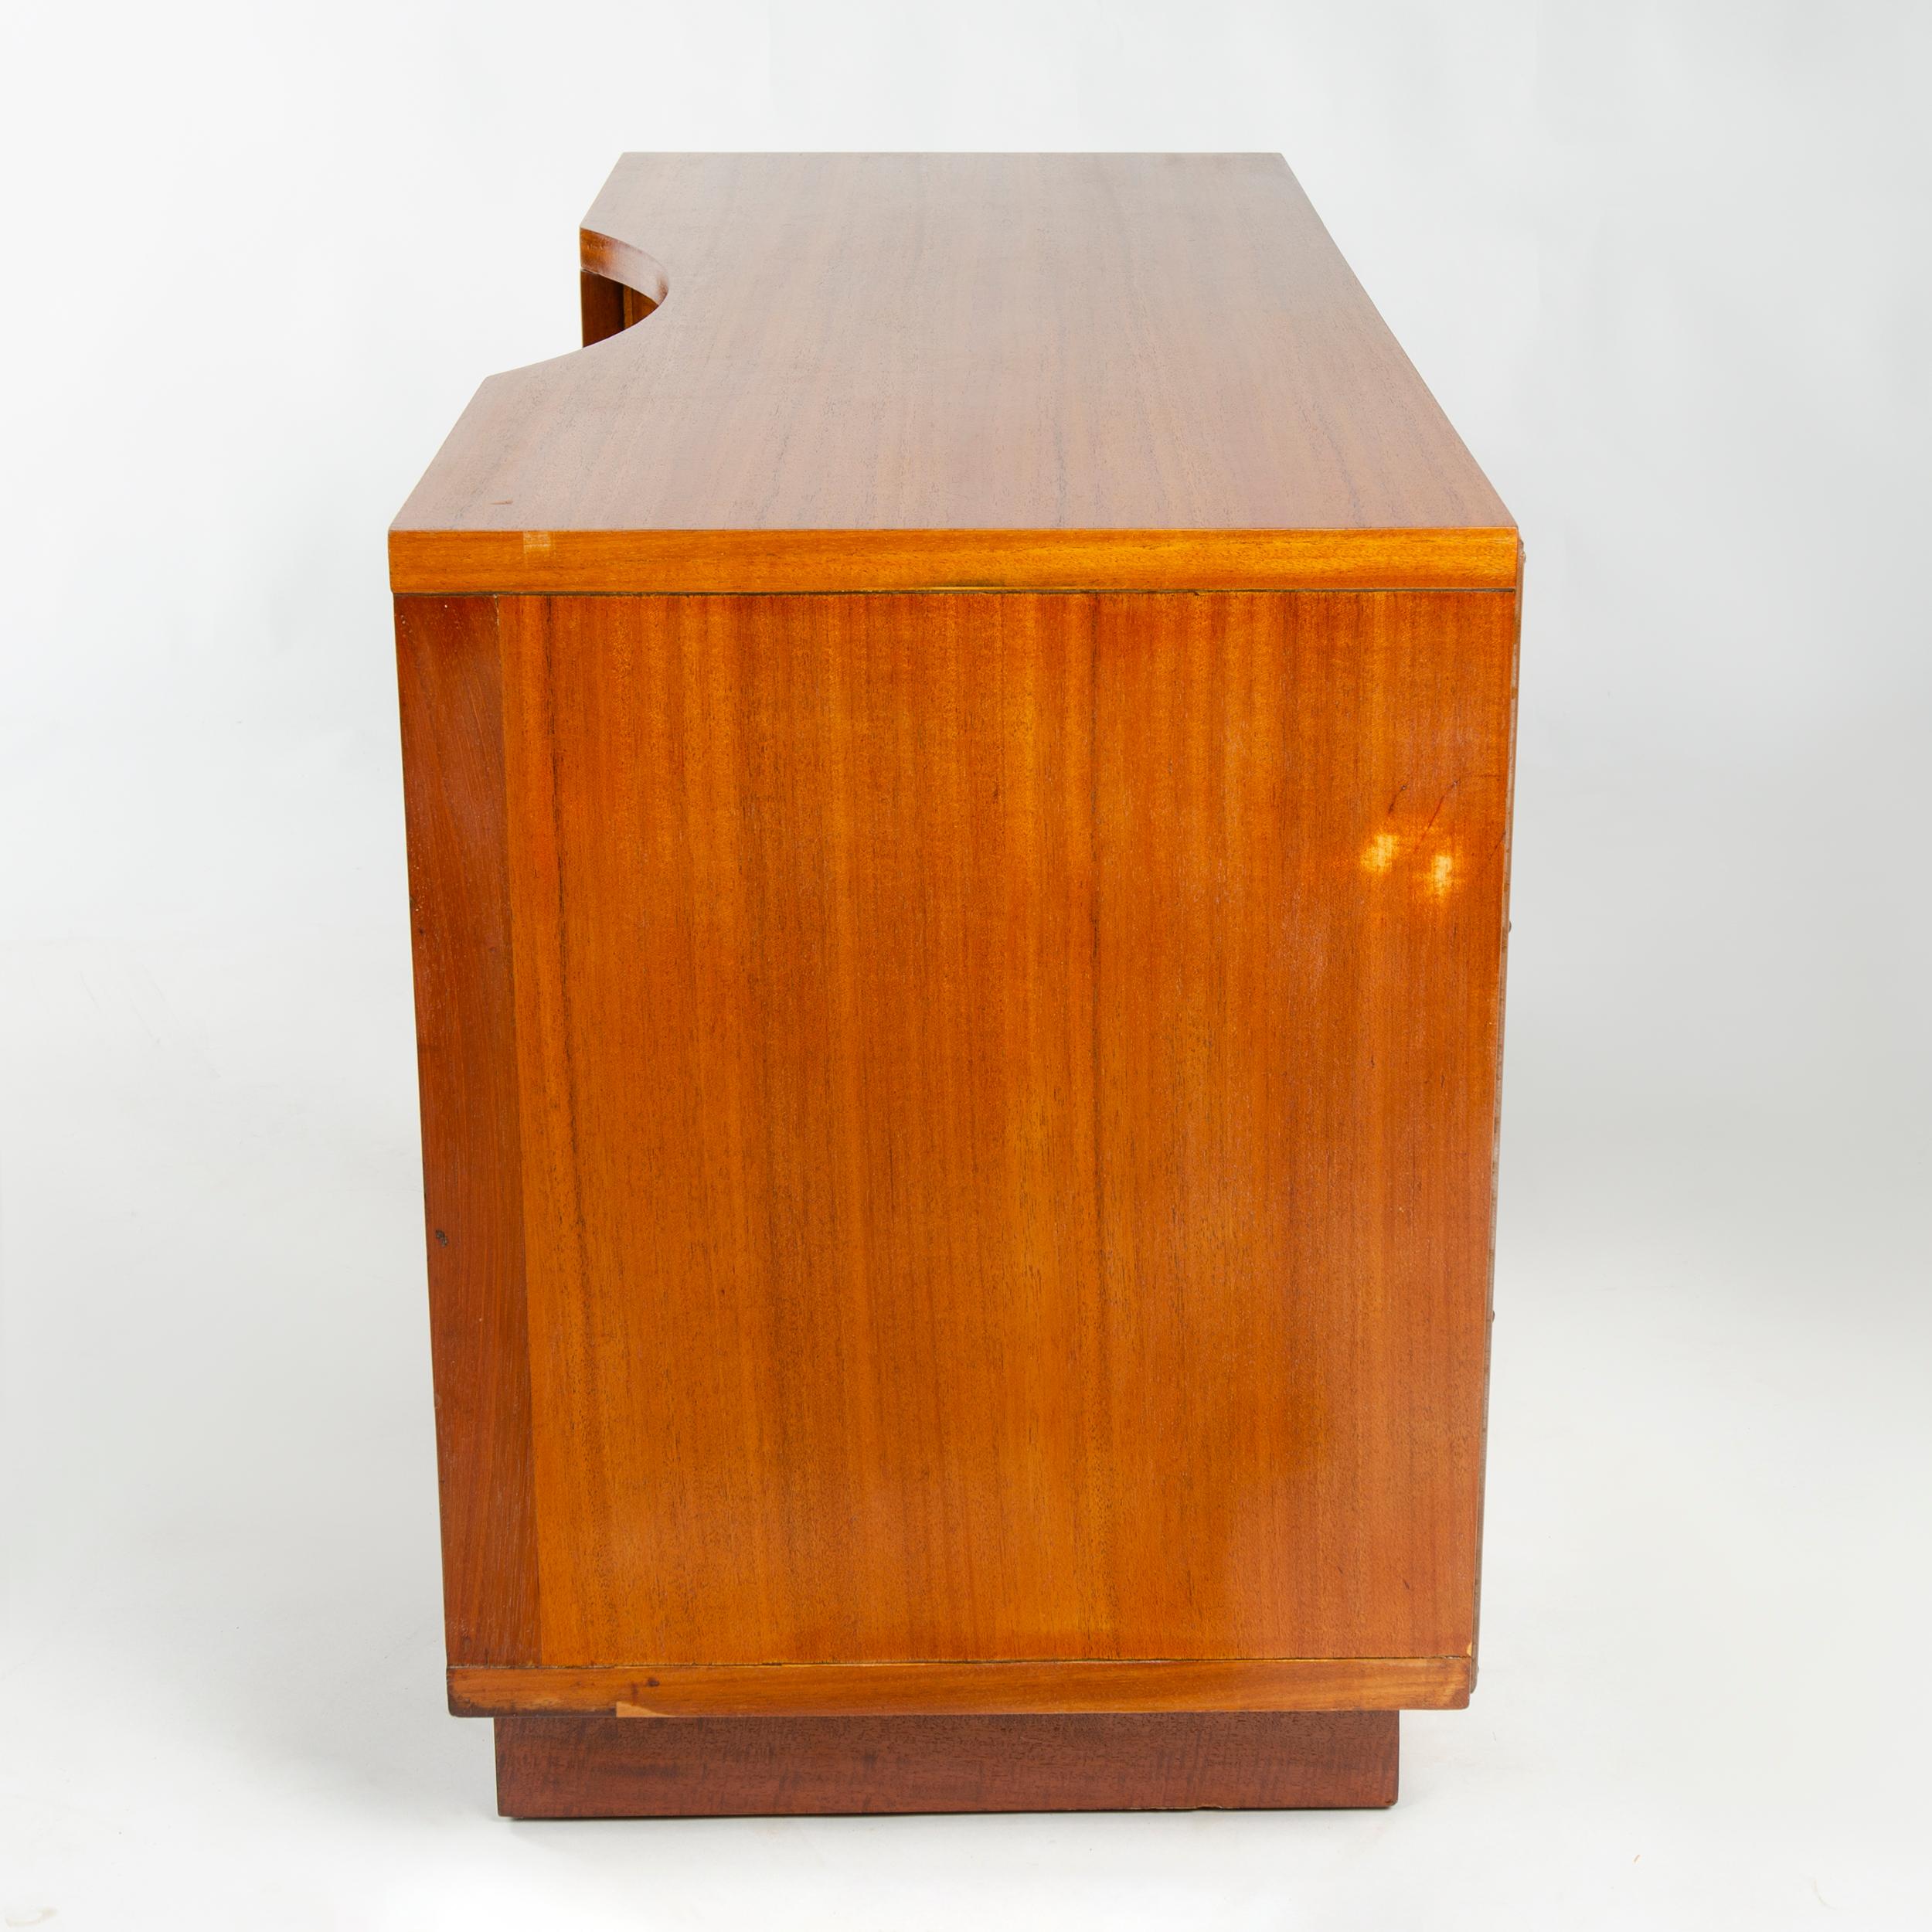 1950s Demilune Vanity or Desk by Edward Wormley for Dunbar In Good Condition For Sale In Sagaponack, NY